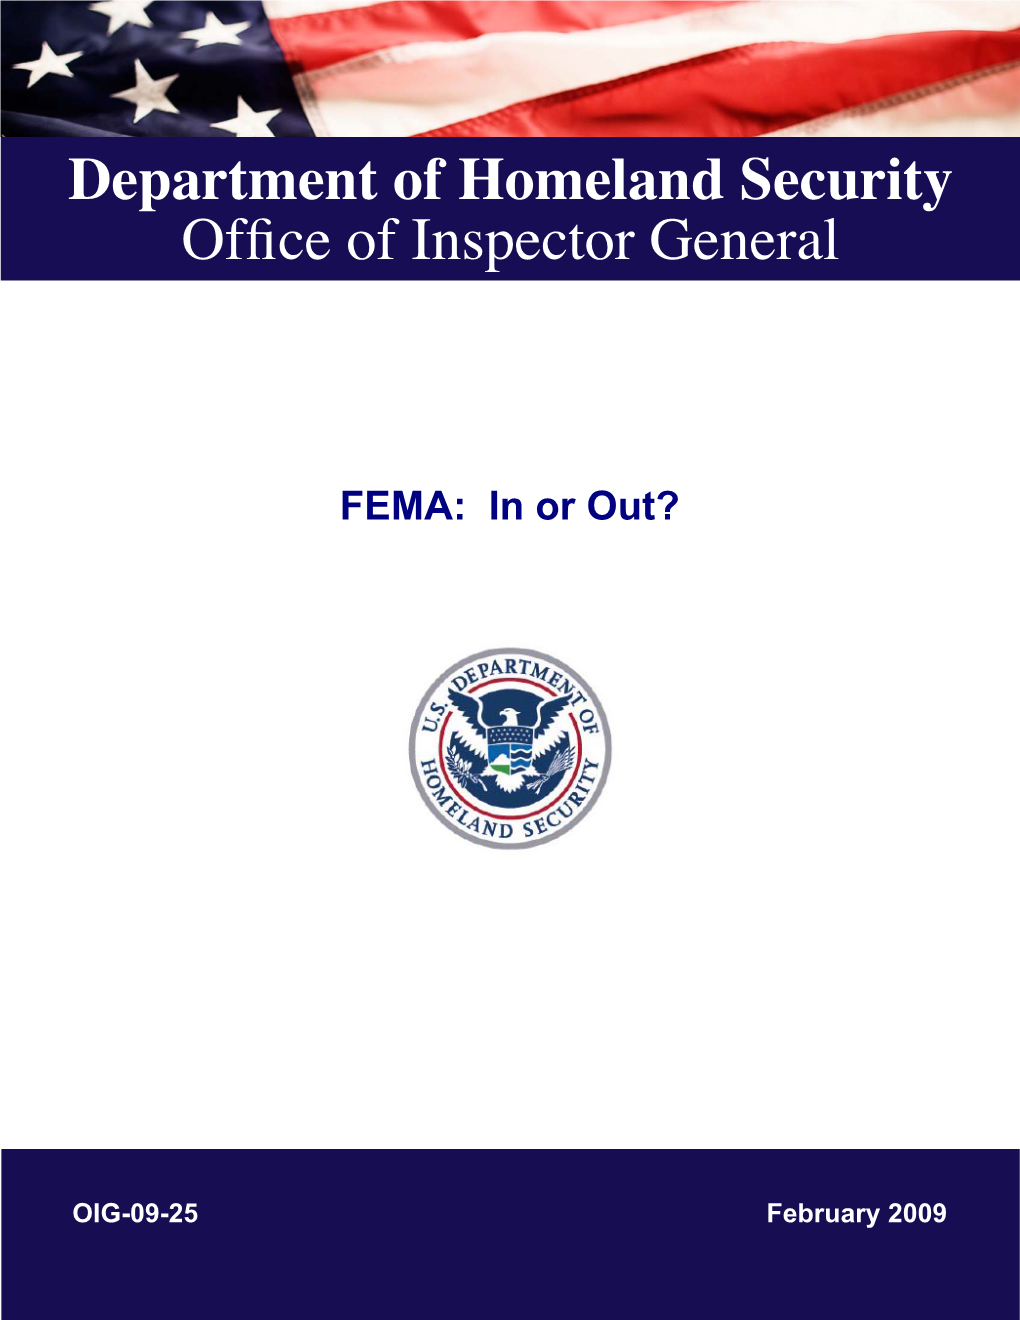 FEMA: in Or Out?